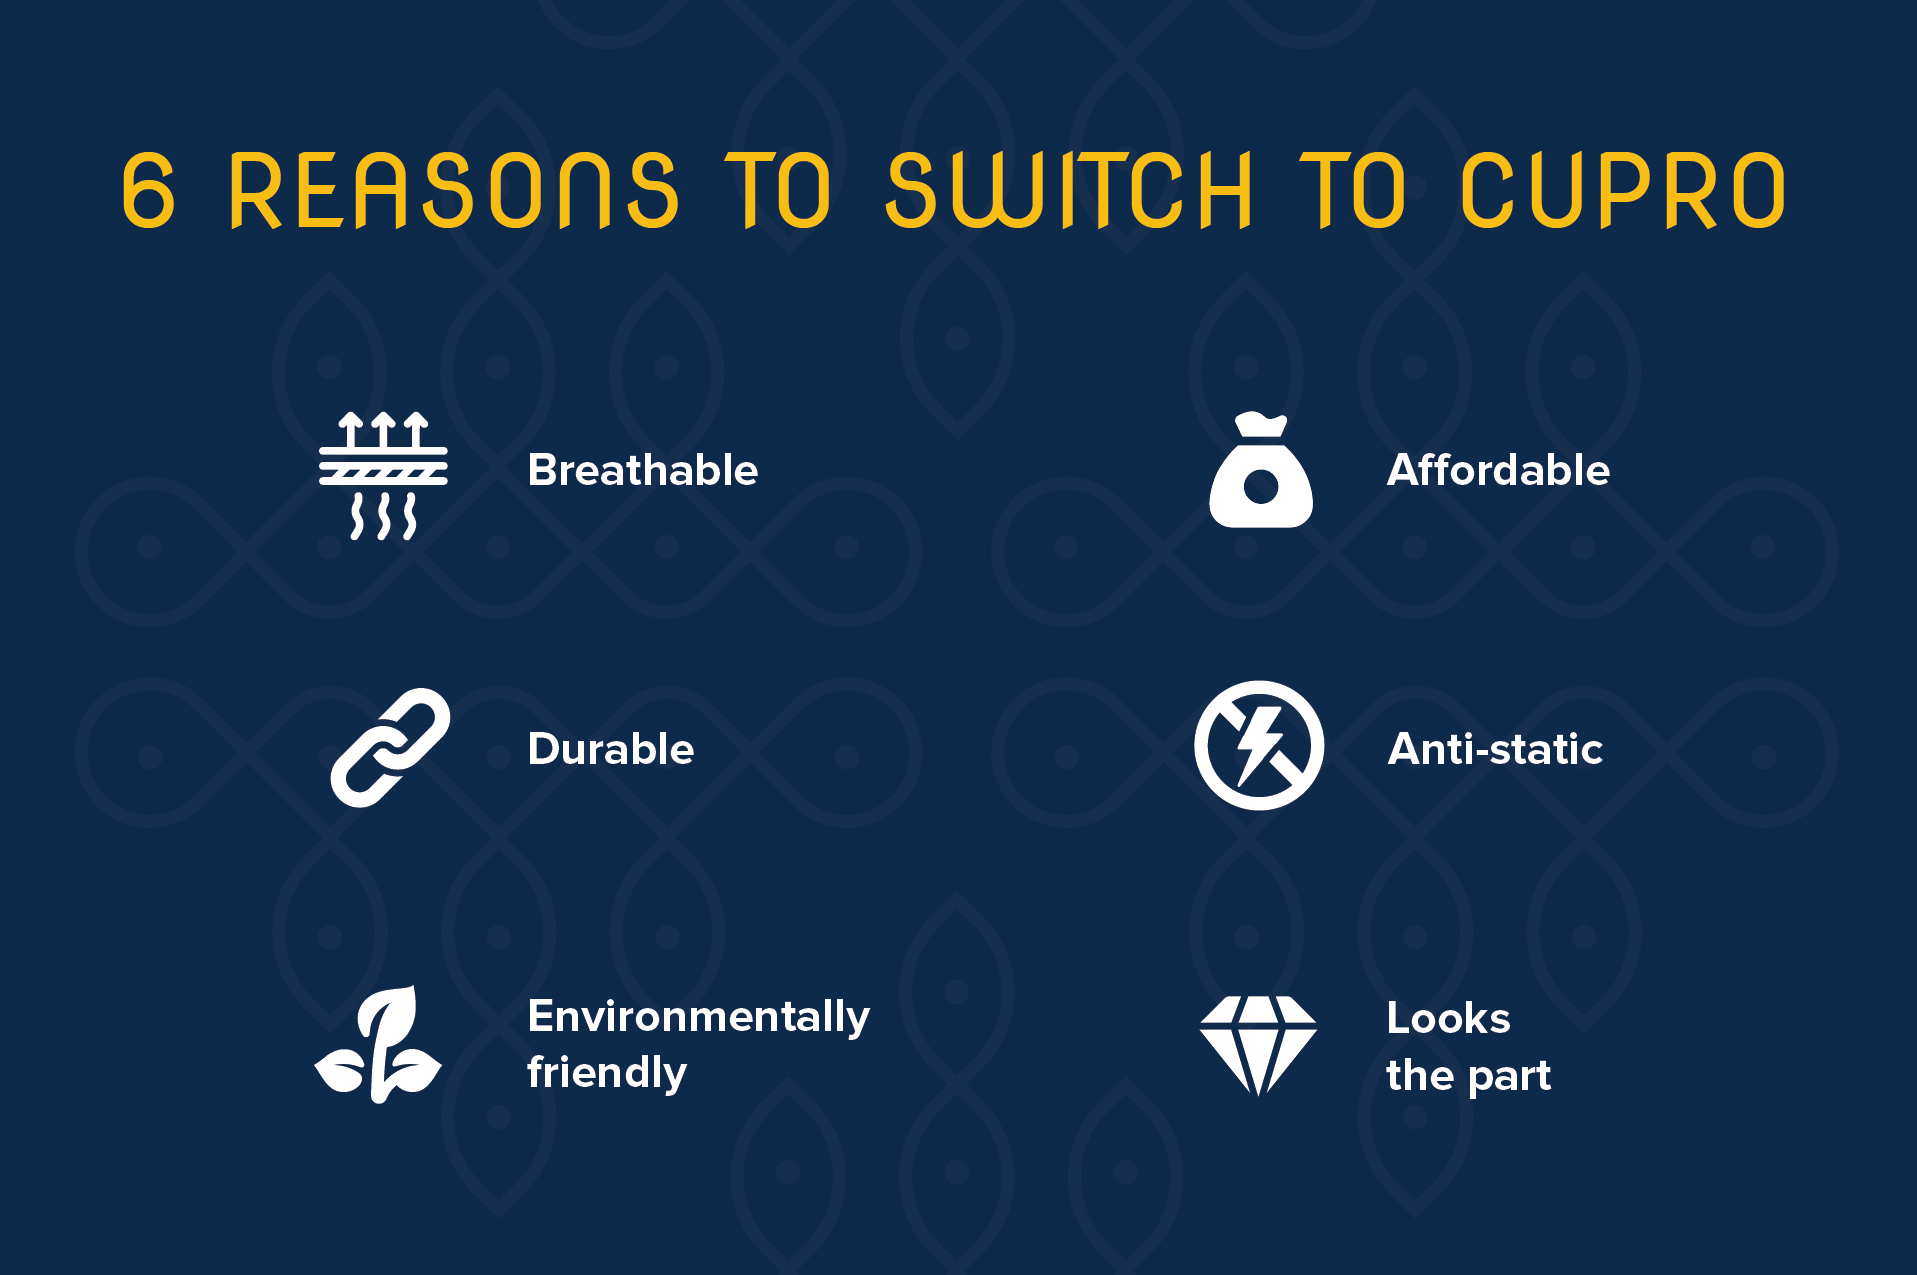 Six reasons to switch to cupro